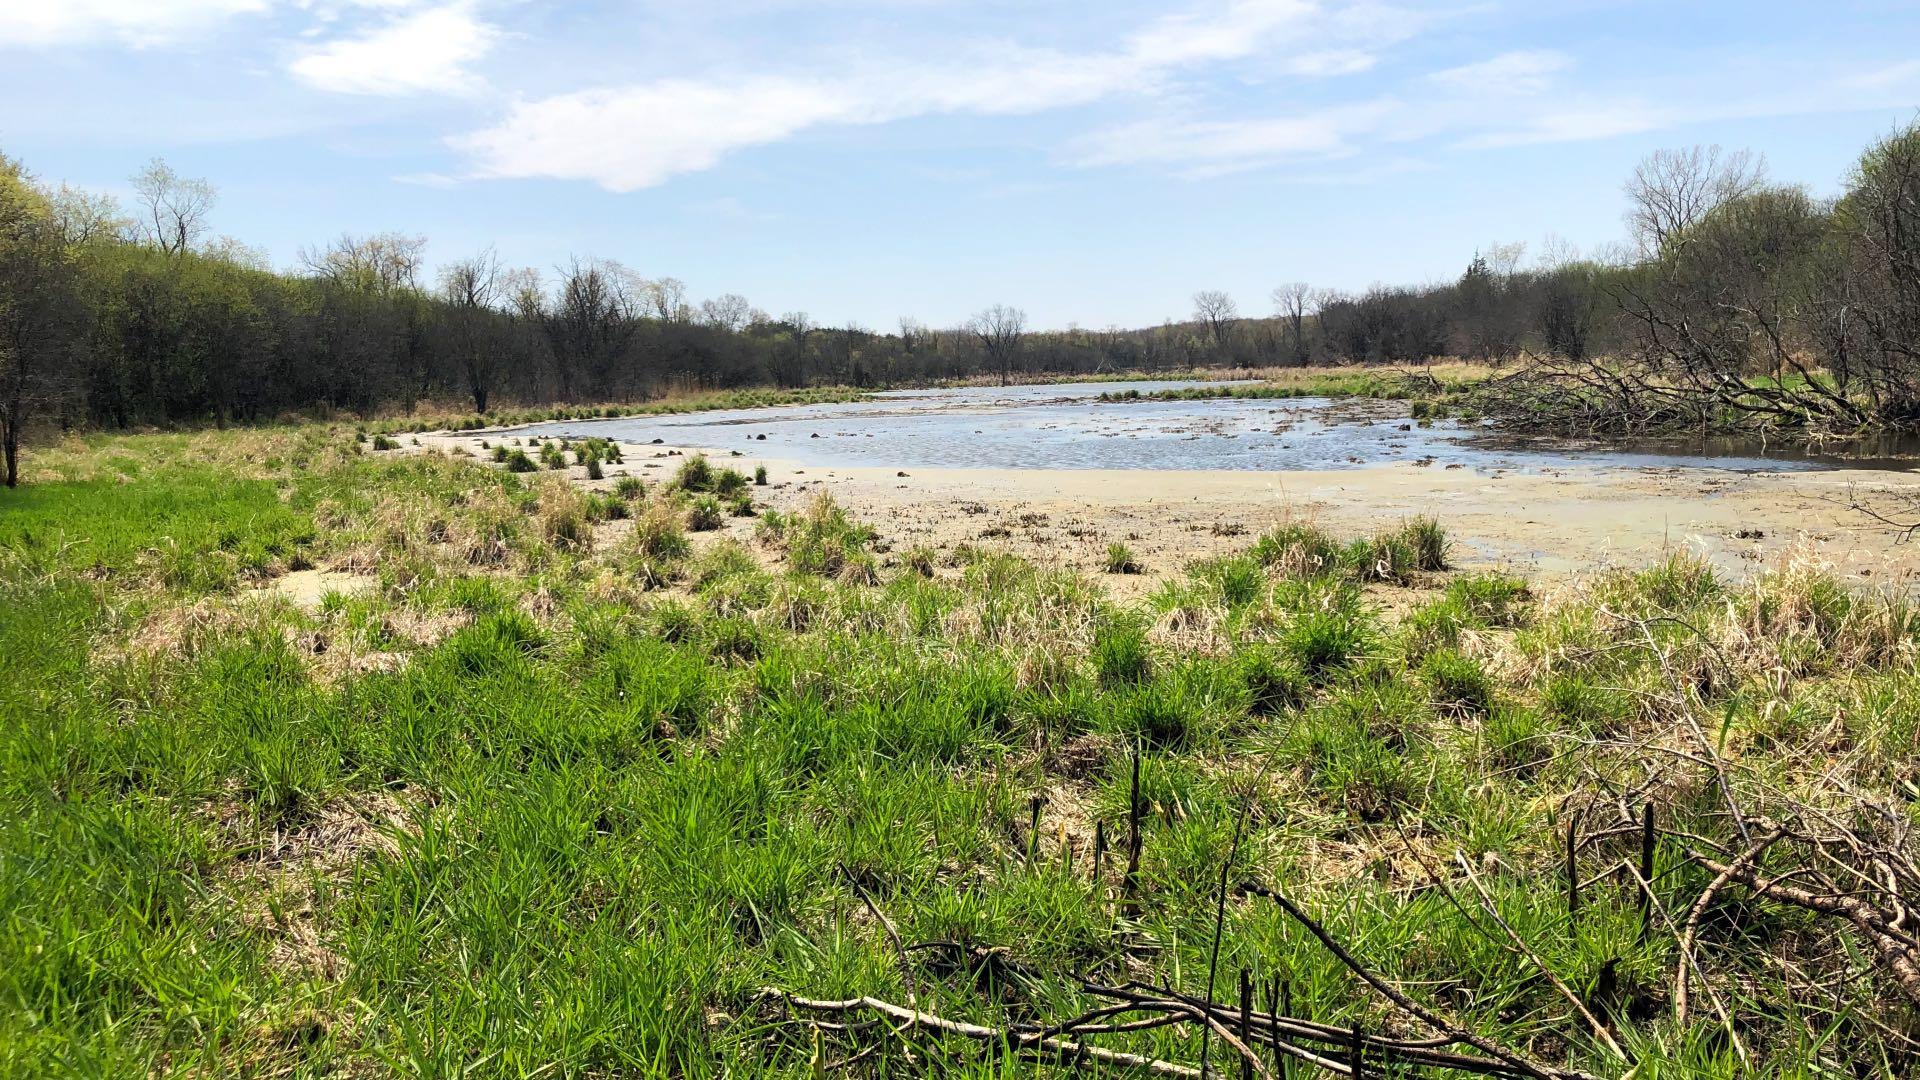 Wetlands were drained to make way for agriculture. In the process, their benefits to the ecosystem were lost, including filtering contaminants and supporting biodiversity. (Patty Wetli / WTTW News)